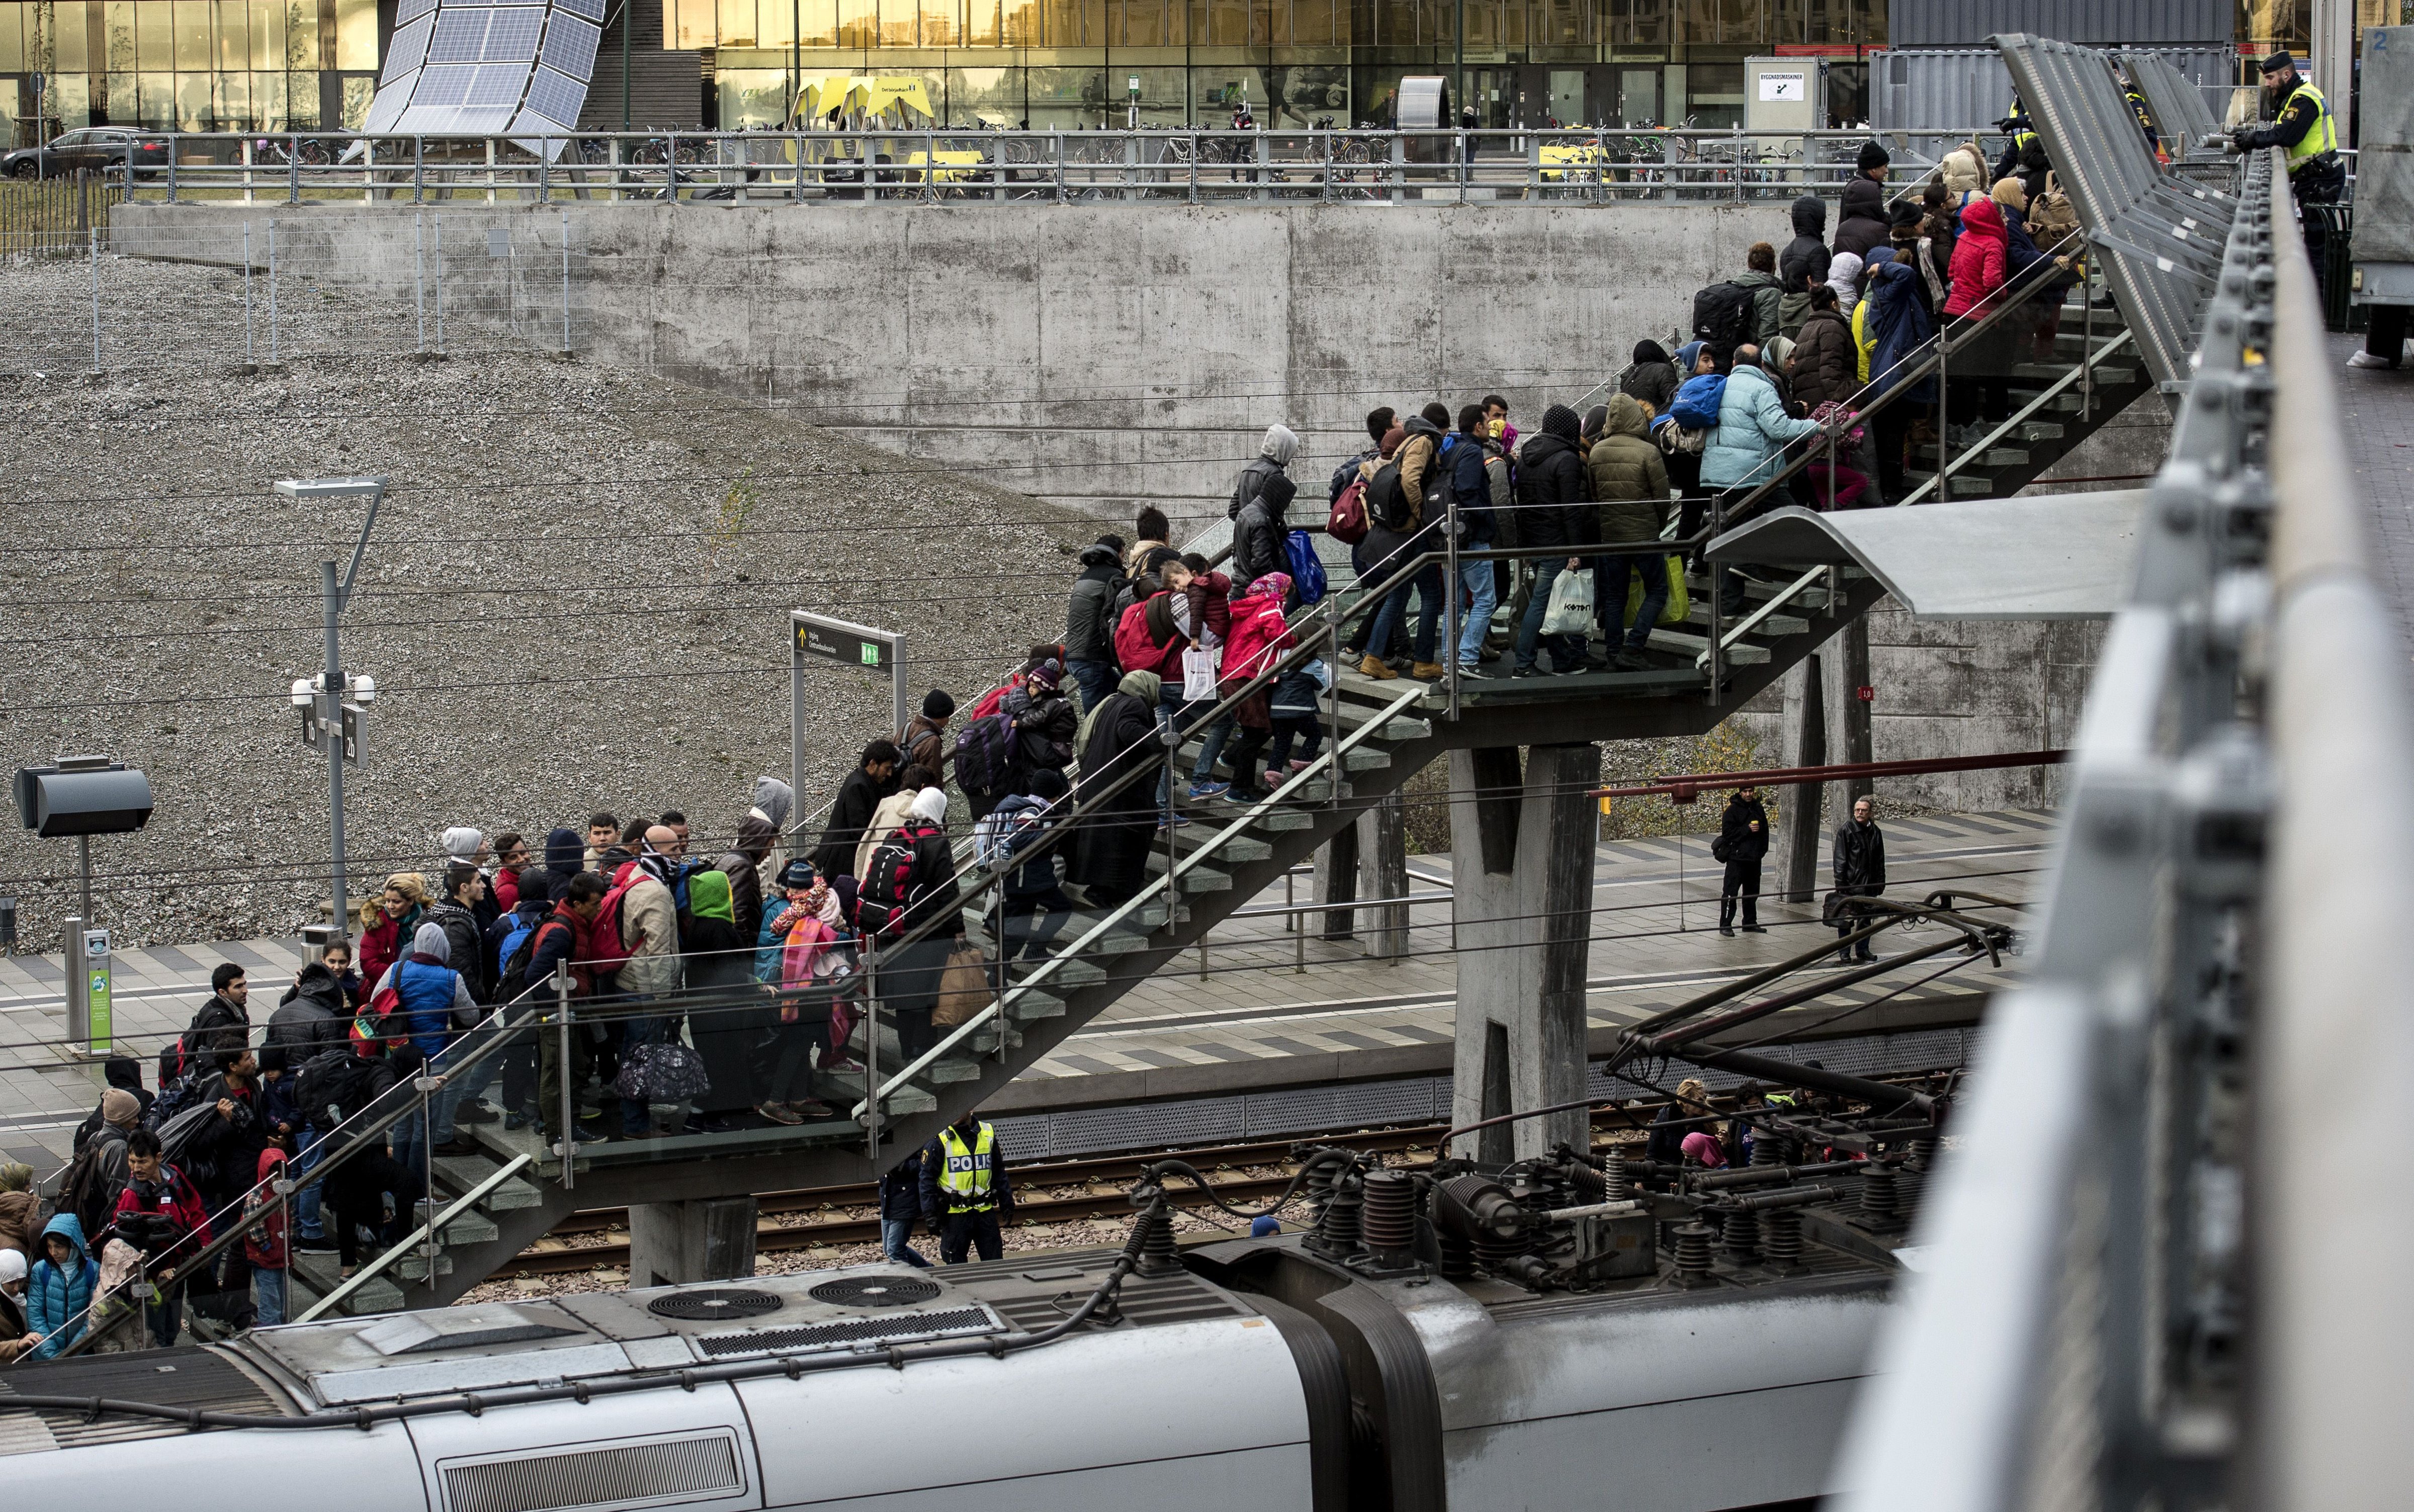 Police organize the line of refugees on the stairway leading up from the trains arriving from Denmark on Nov. 19, 2015 (Johan Nilsson—AFP/Getty Images)